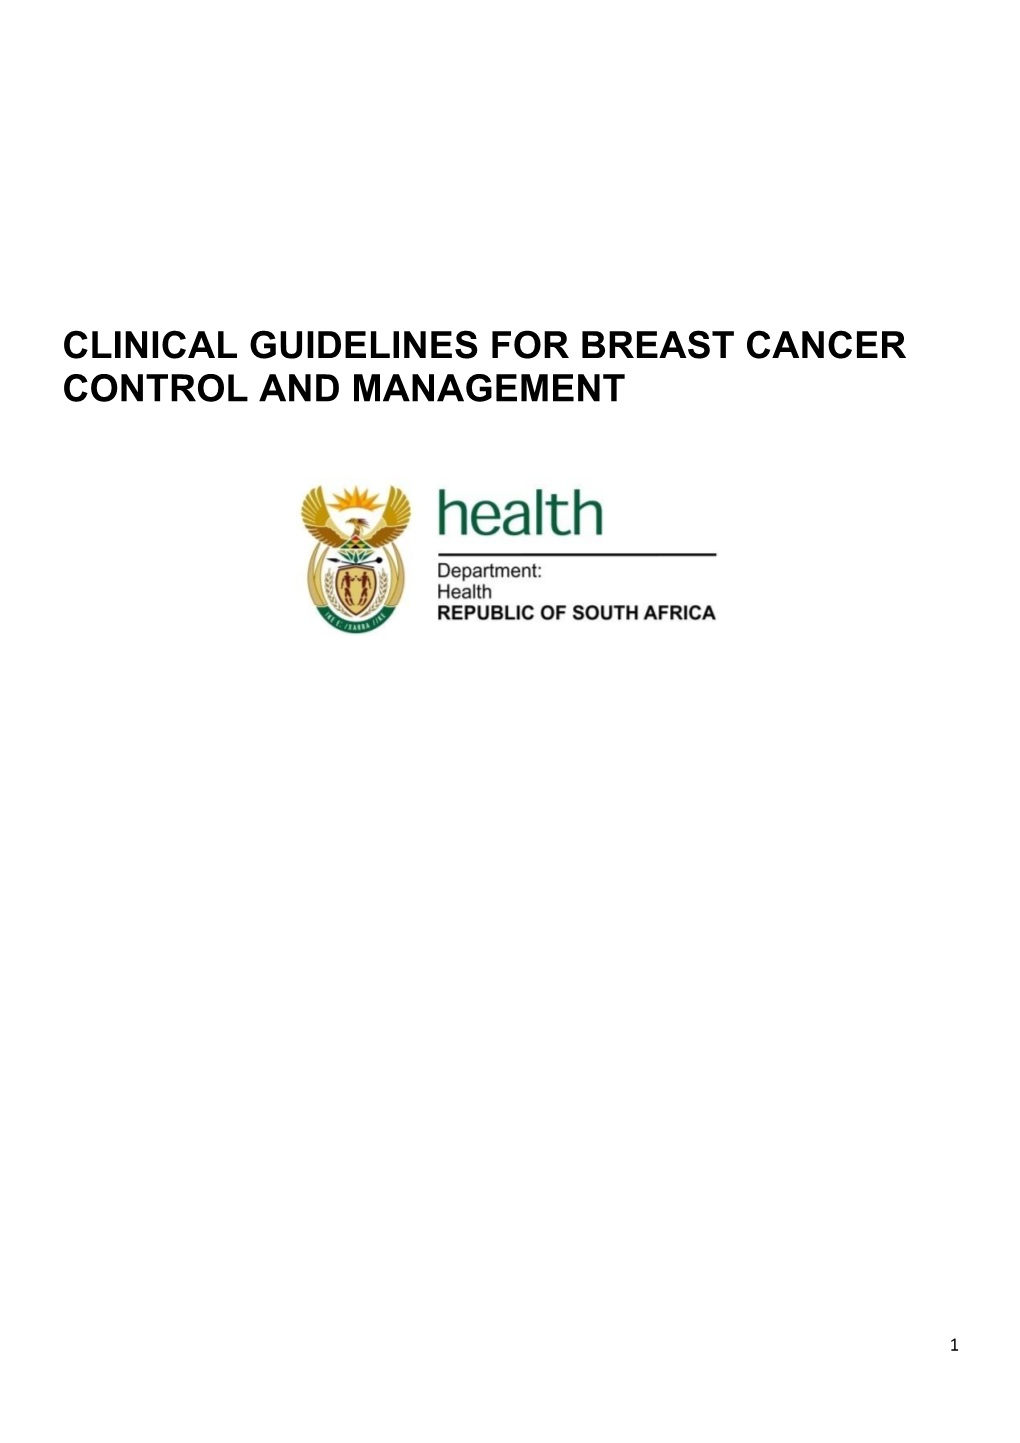 Clinical Guidelines for Breast Cancer Control and Management